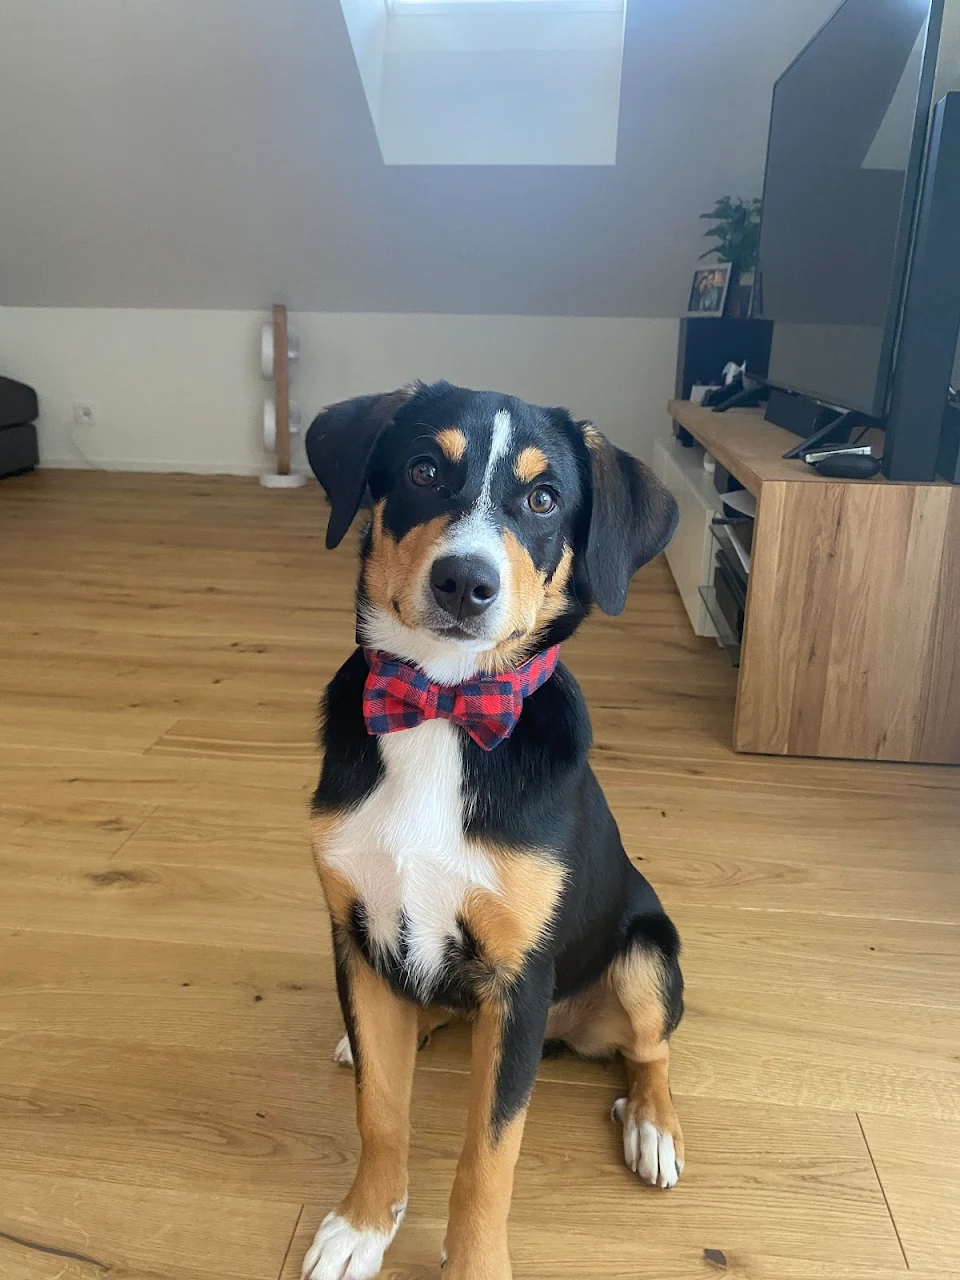 This is our good boy Sam. He’s 18 weeks old and would like to show you his new bowtie.